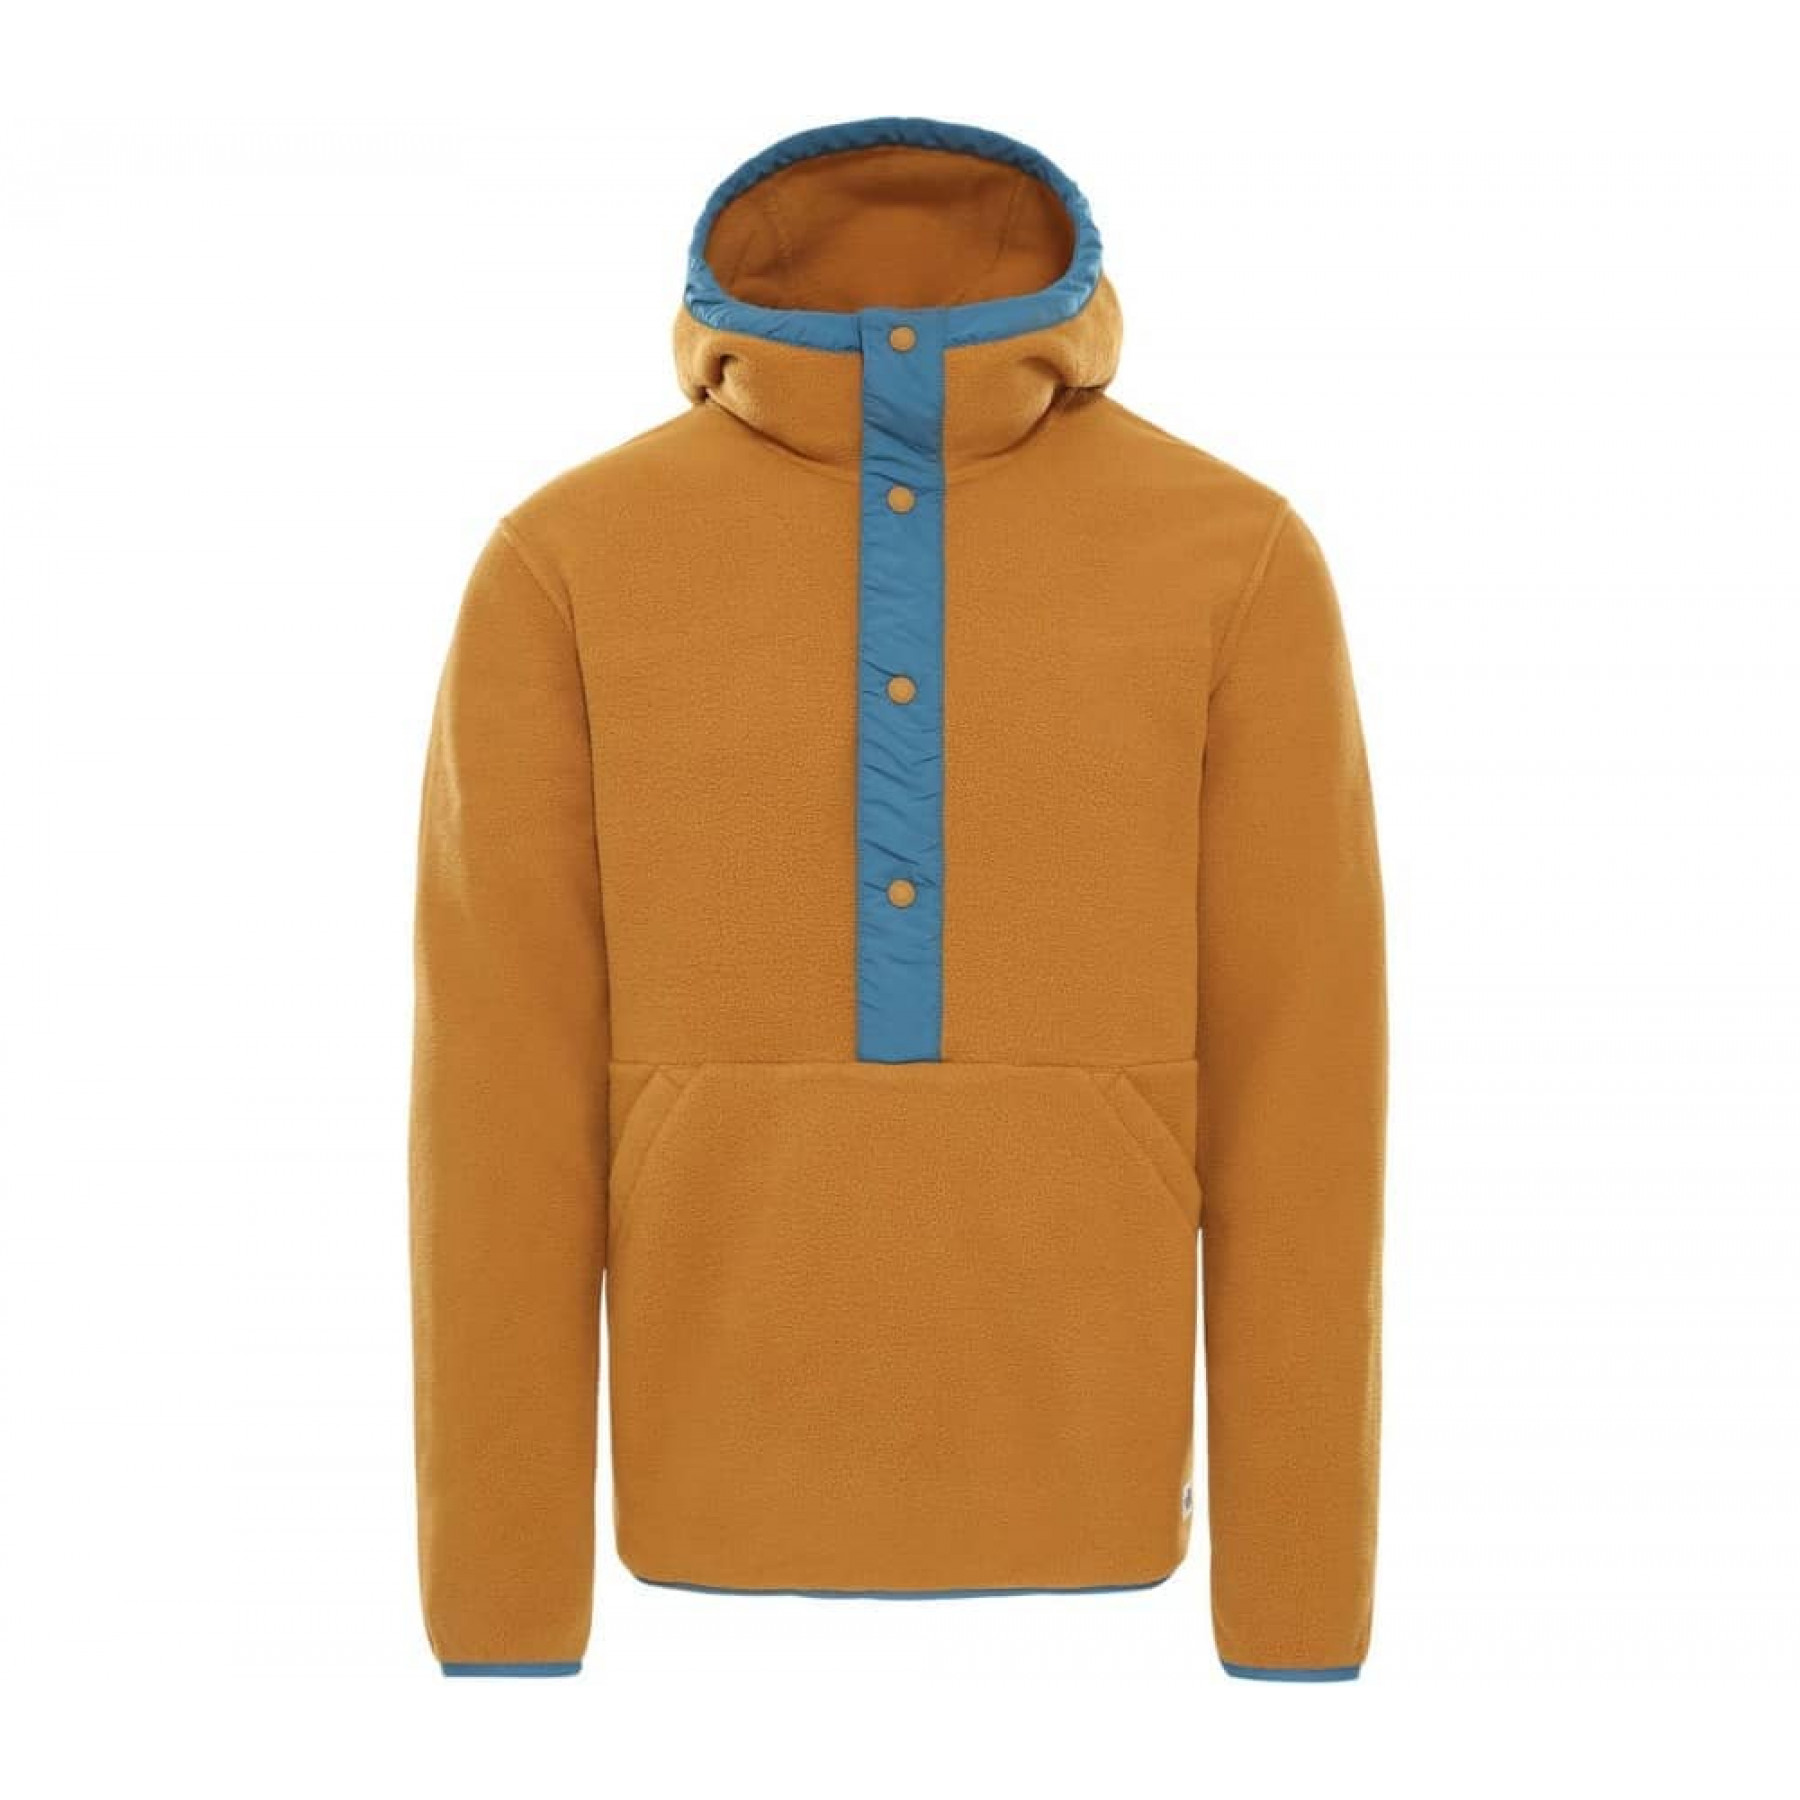 Bluza 1/4 The North Face Carbondale